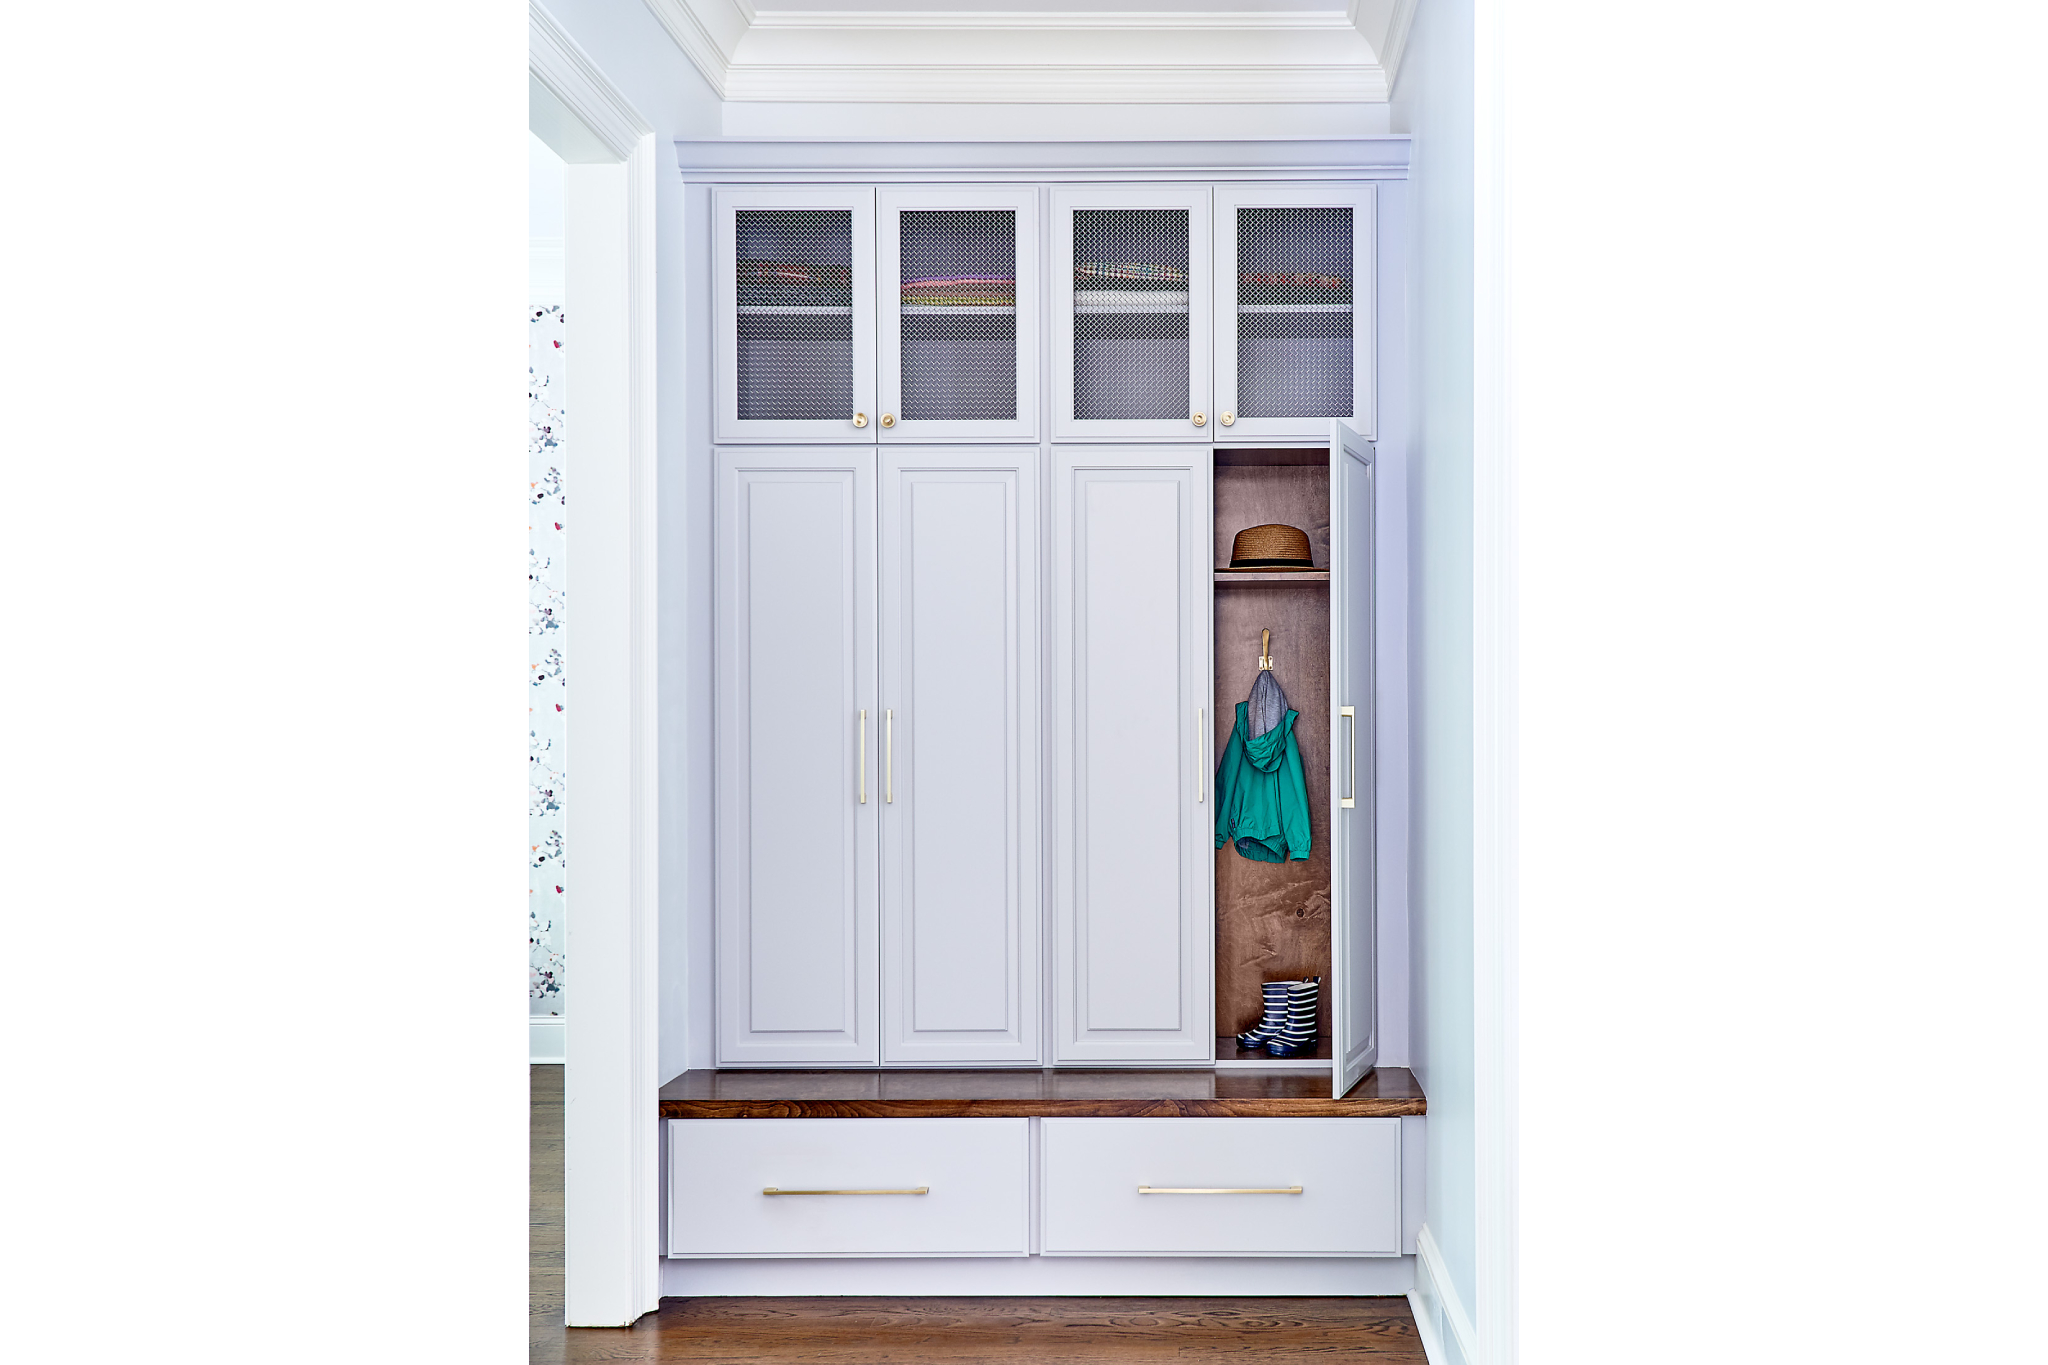 Custom mudroom built-in with tall storage cabinets and bench seating